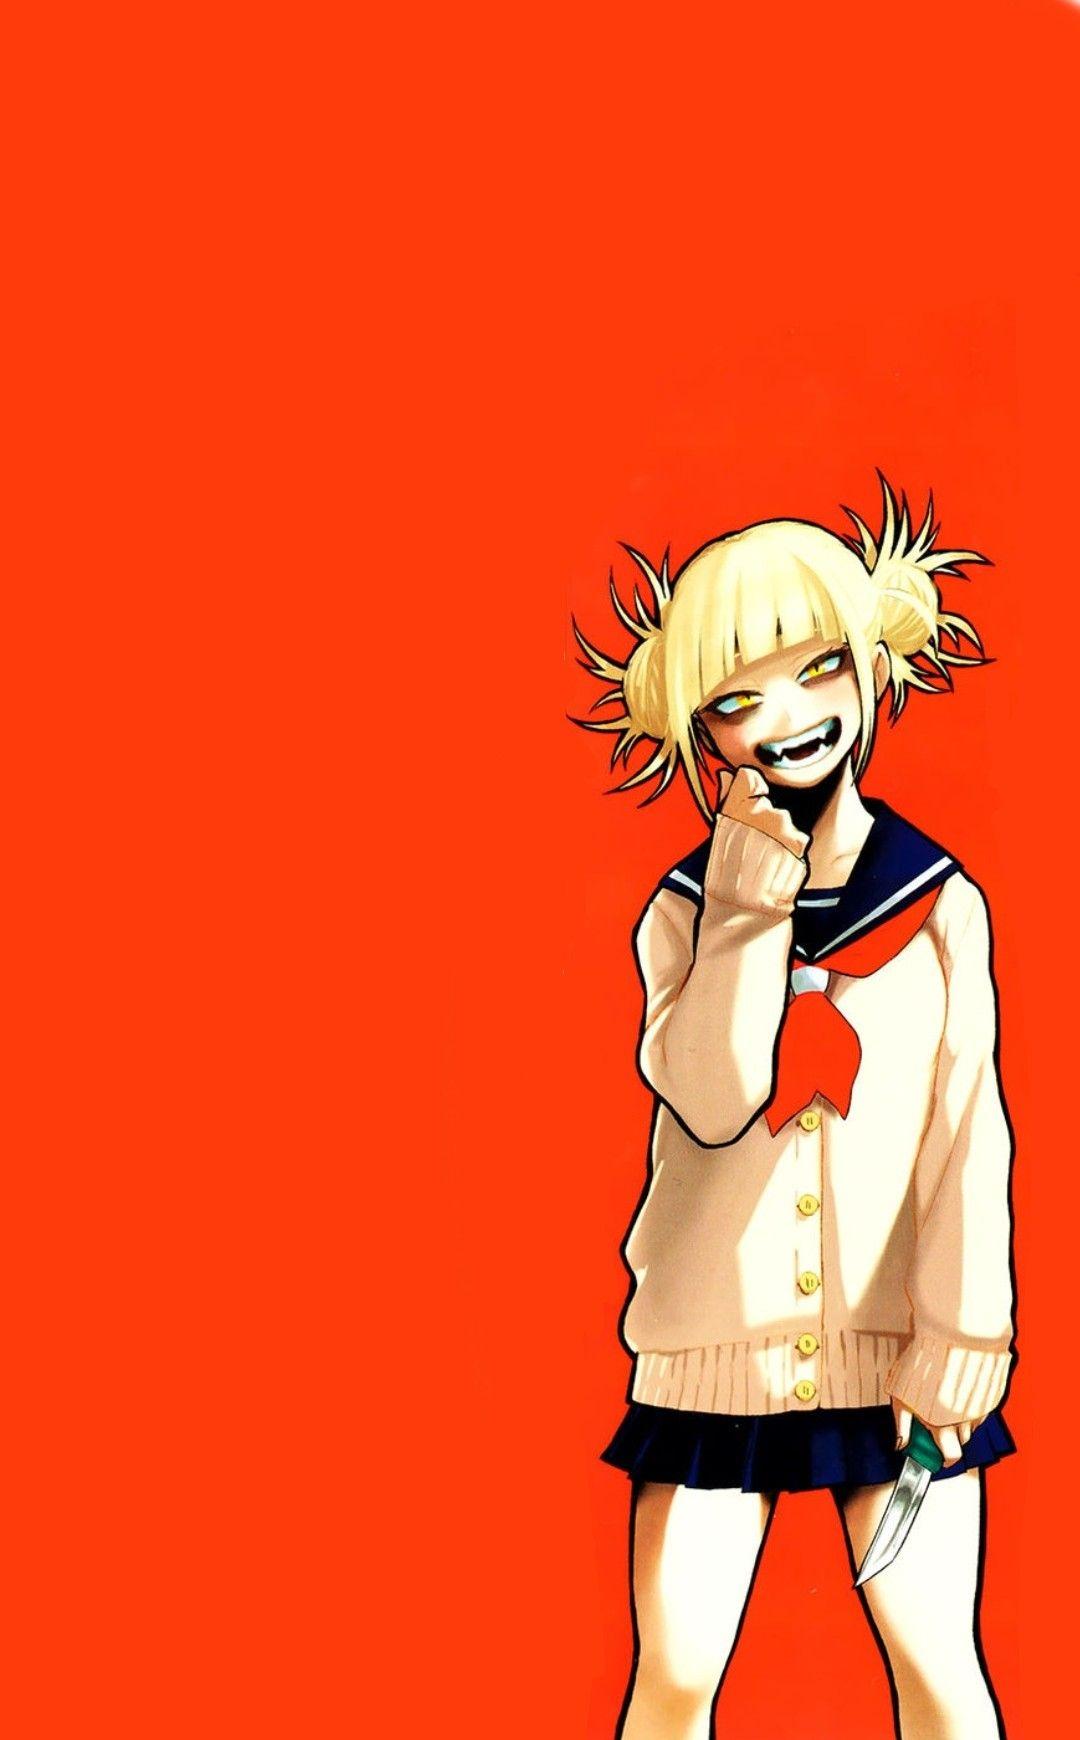 Toga MHA Aesthetic Wallpapers - Wallpaper Cave